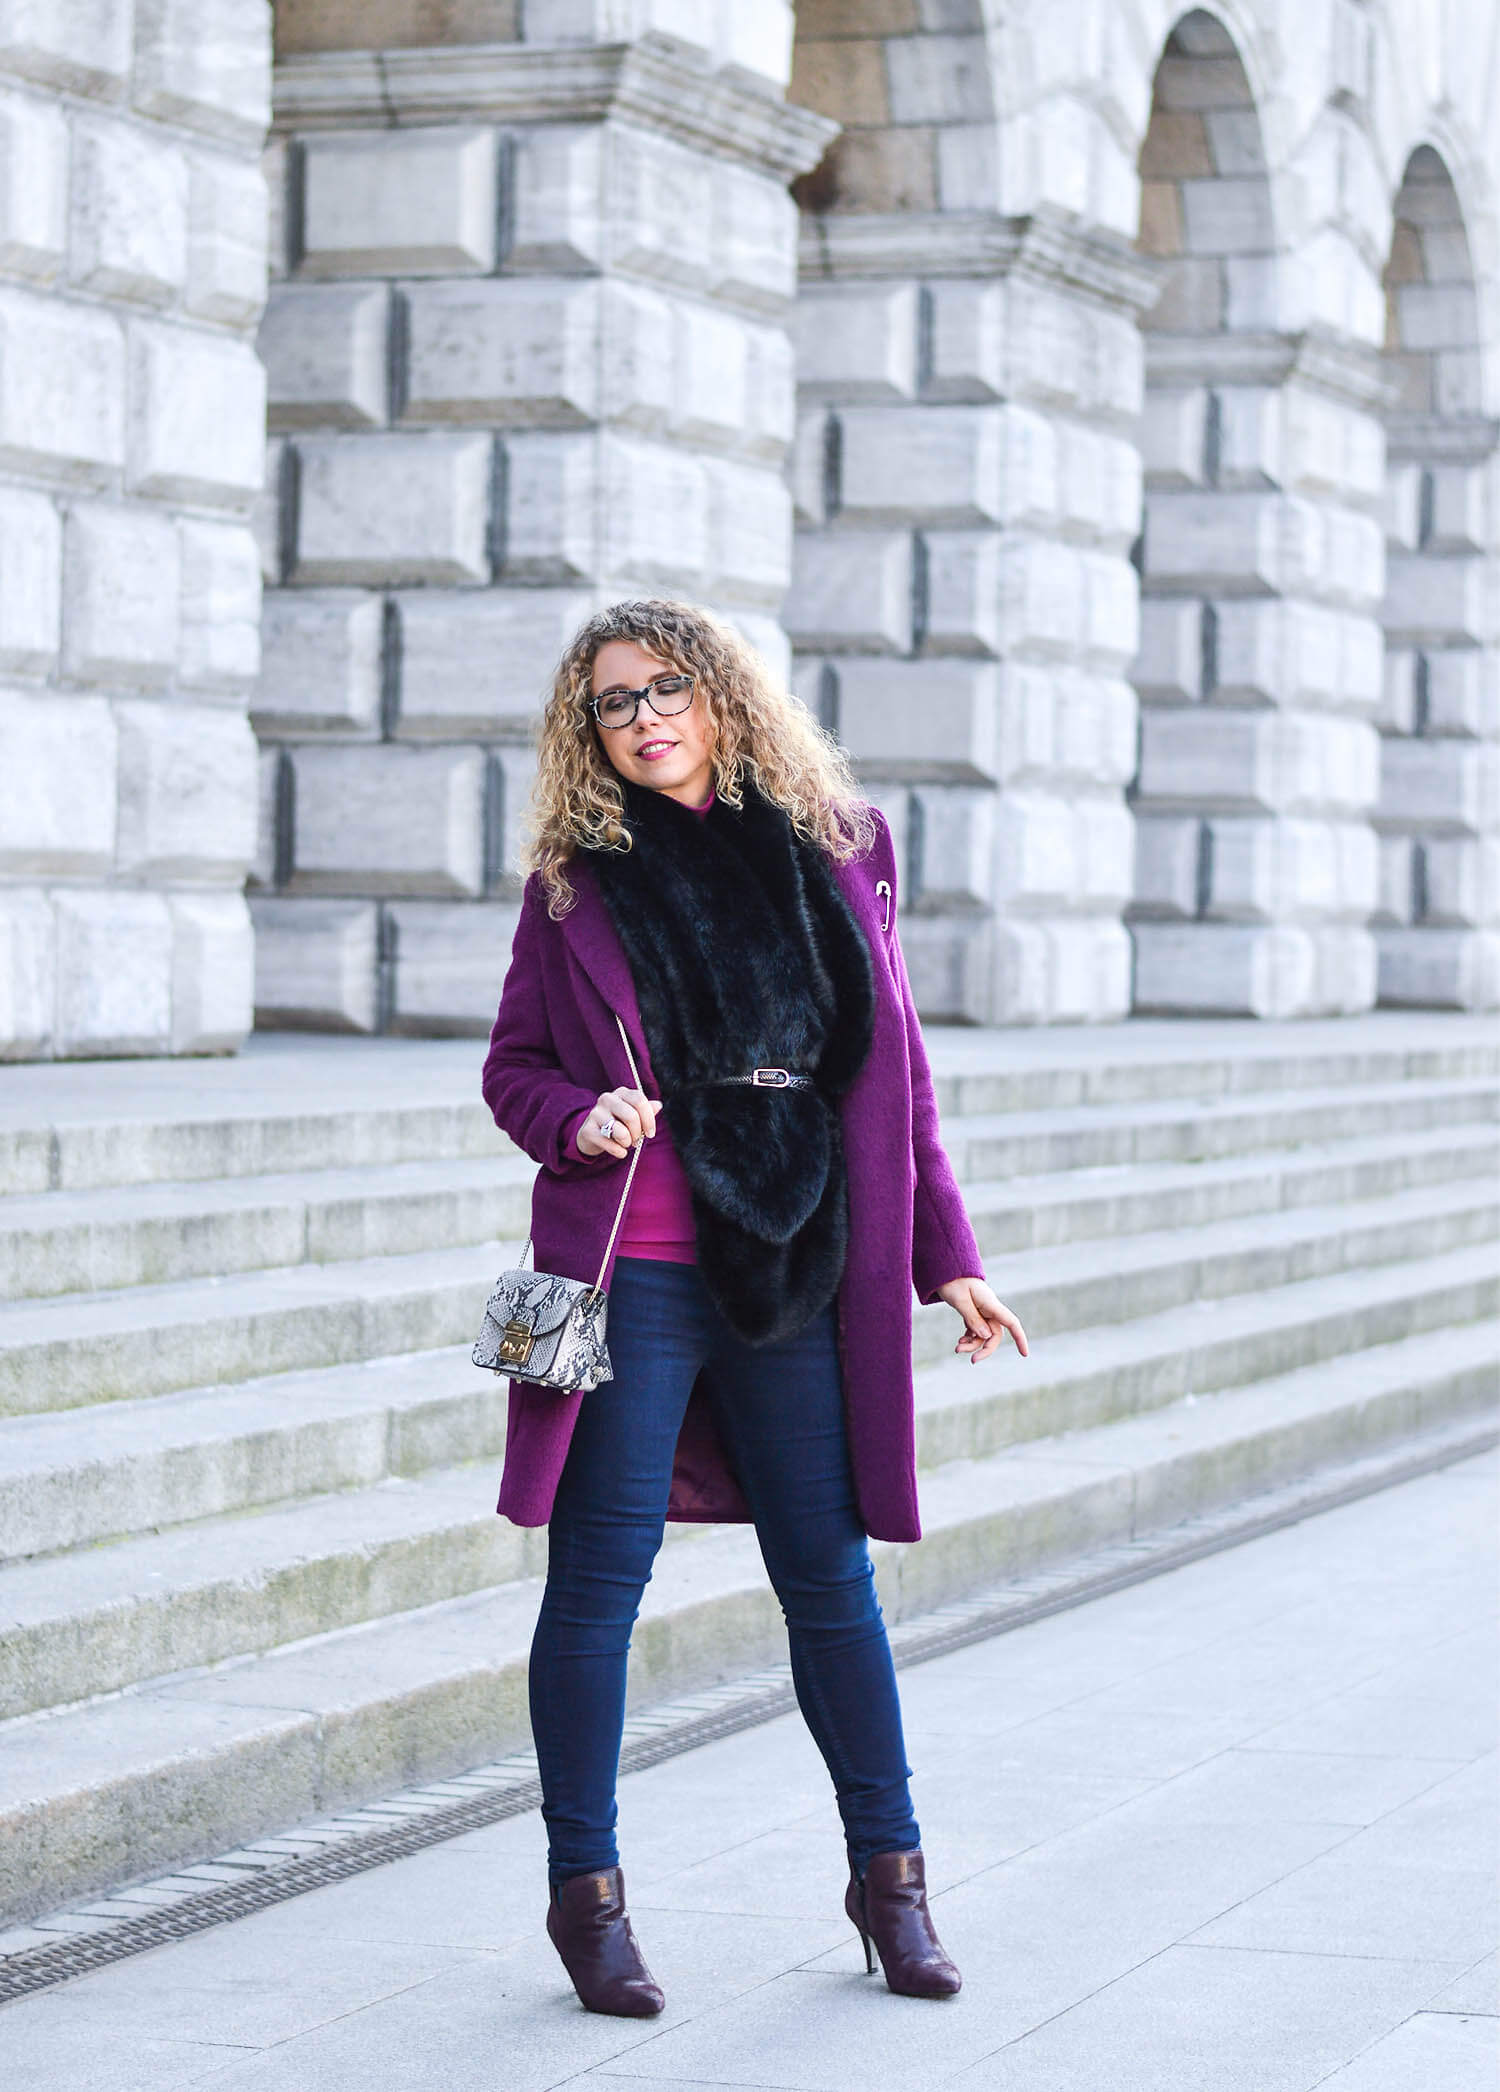 Kationette-fashionblog-Outfit-streetstyle-FakeFur-woolCoat-Furla-ankleBooties-curls